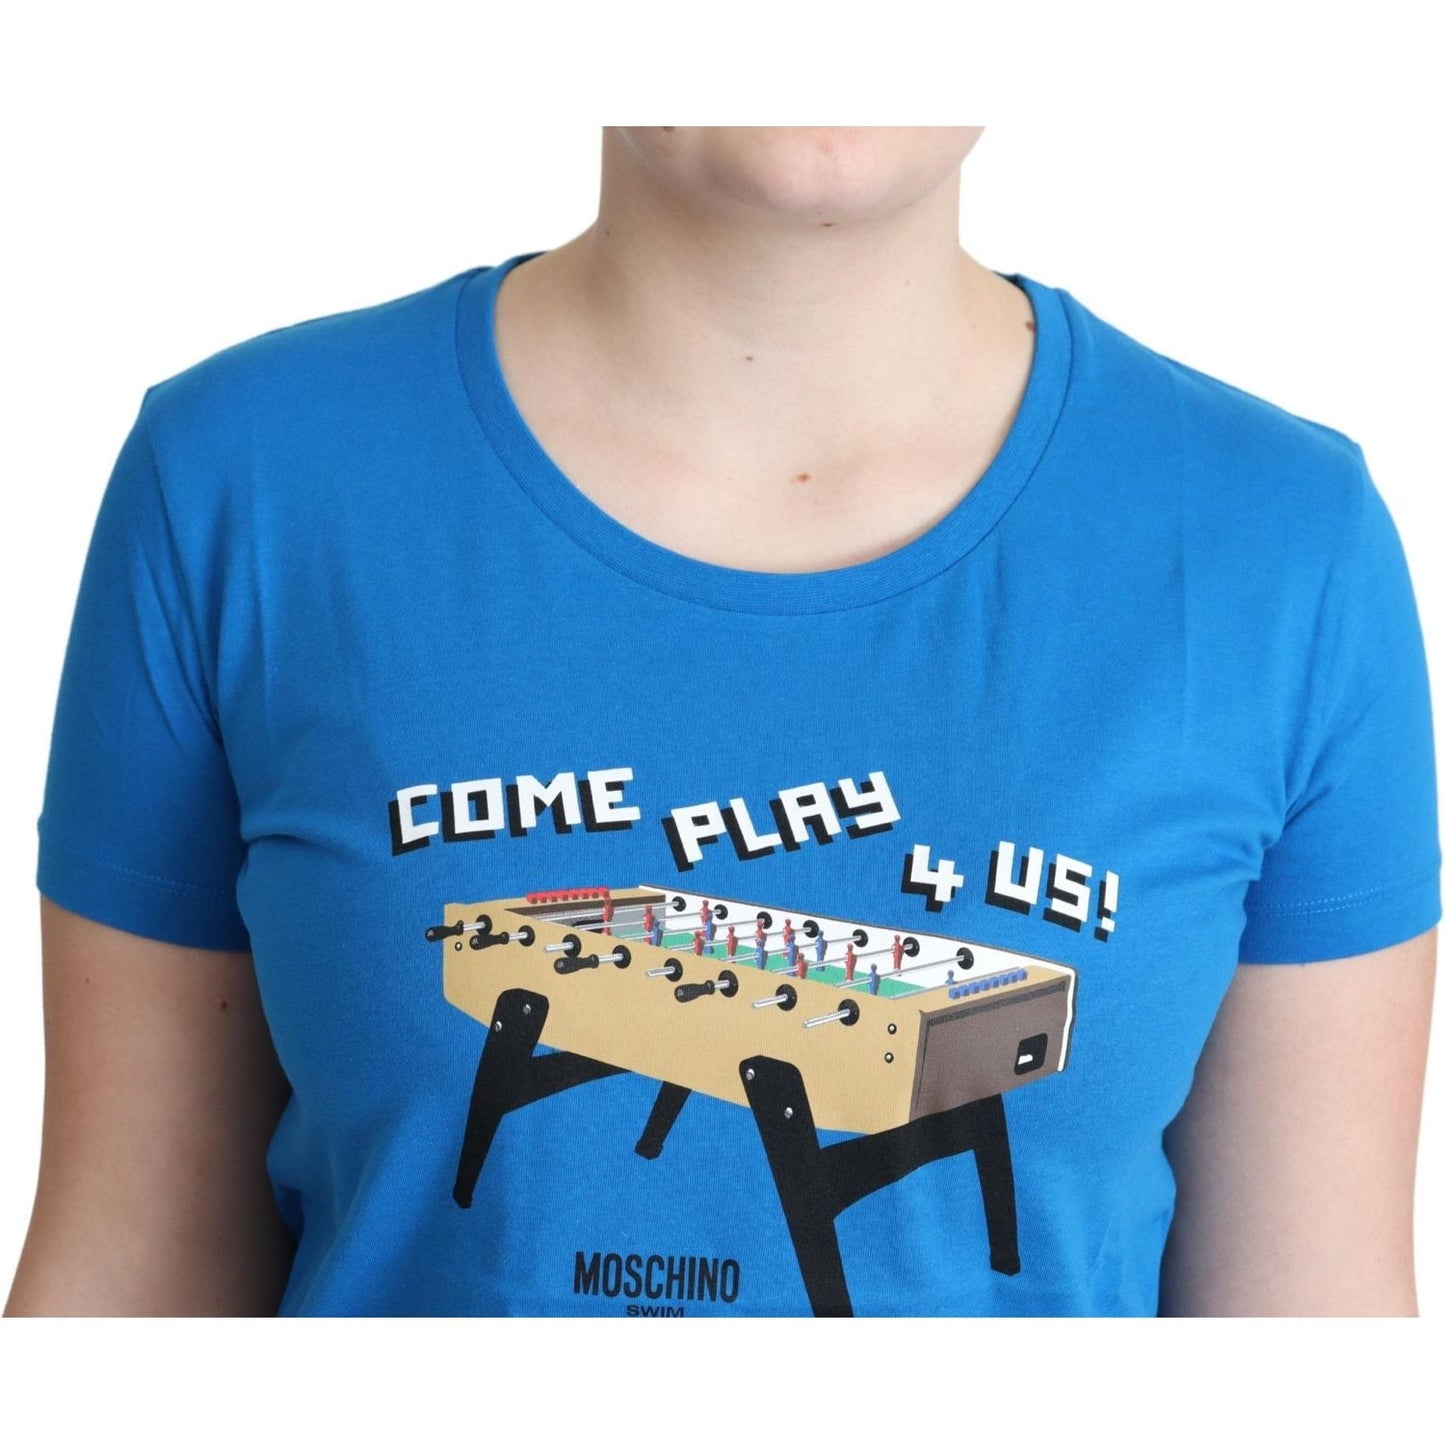 Moschino Chic Moschino Cotton Tee with Unique Print blue-cotton-come-play-4-us-print-t-shirt